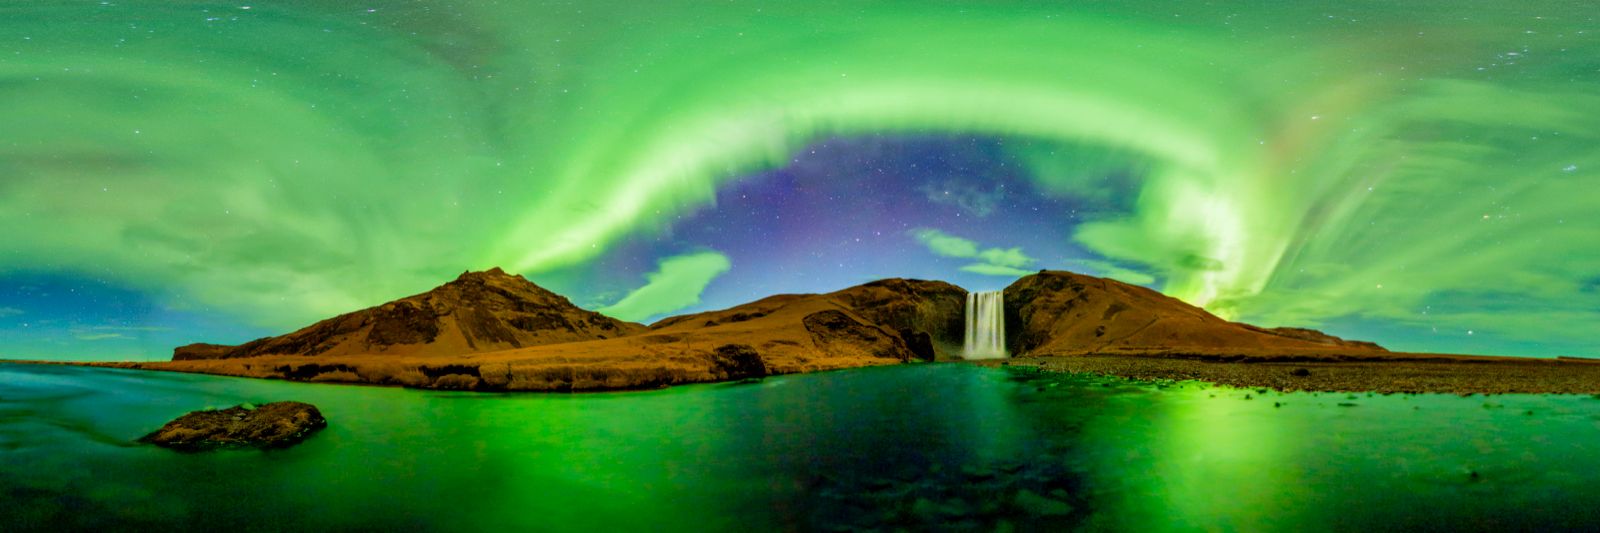 21 of the best astronomy photographs that are out of this world image 11